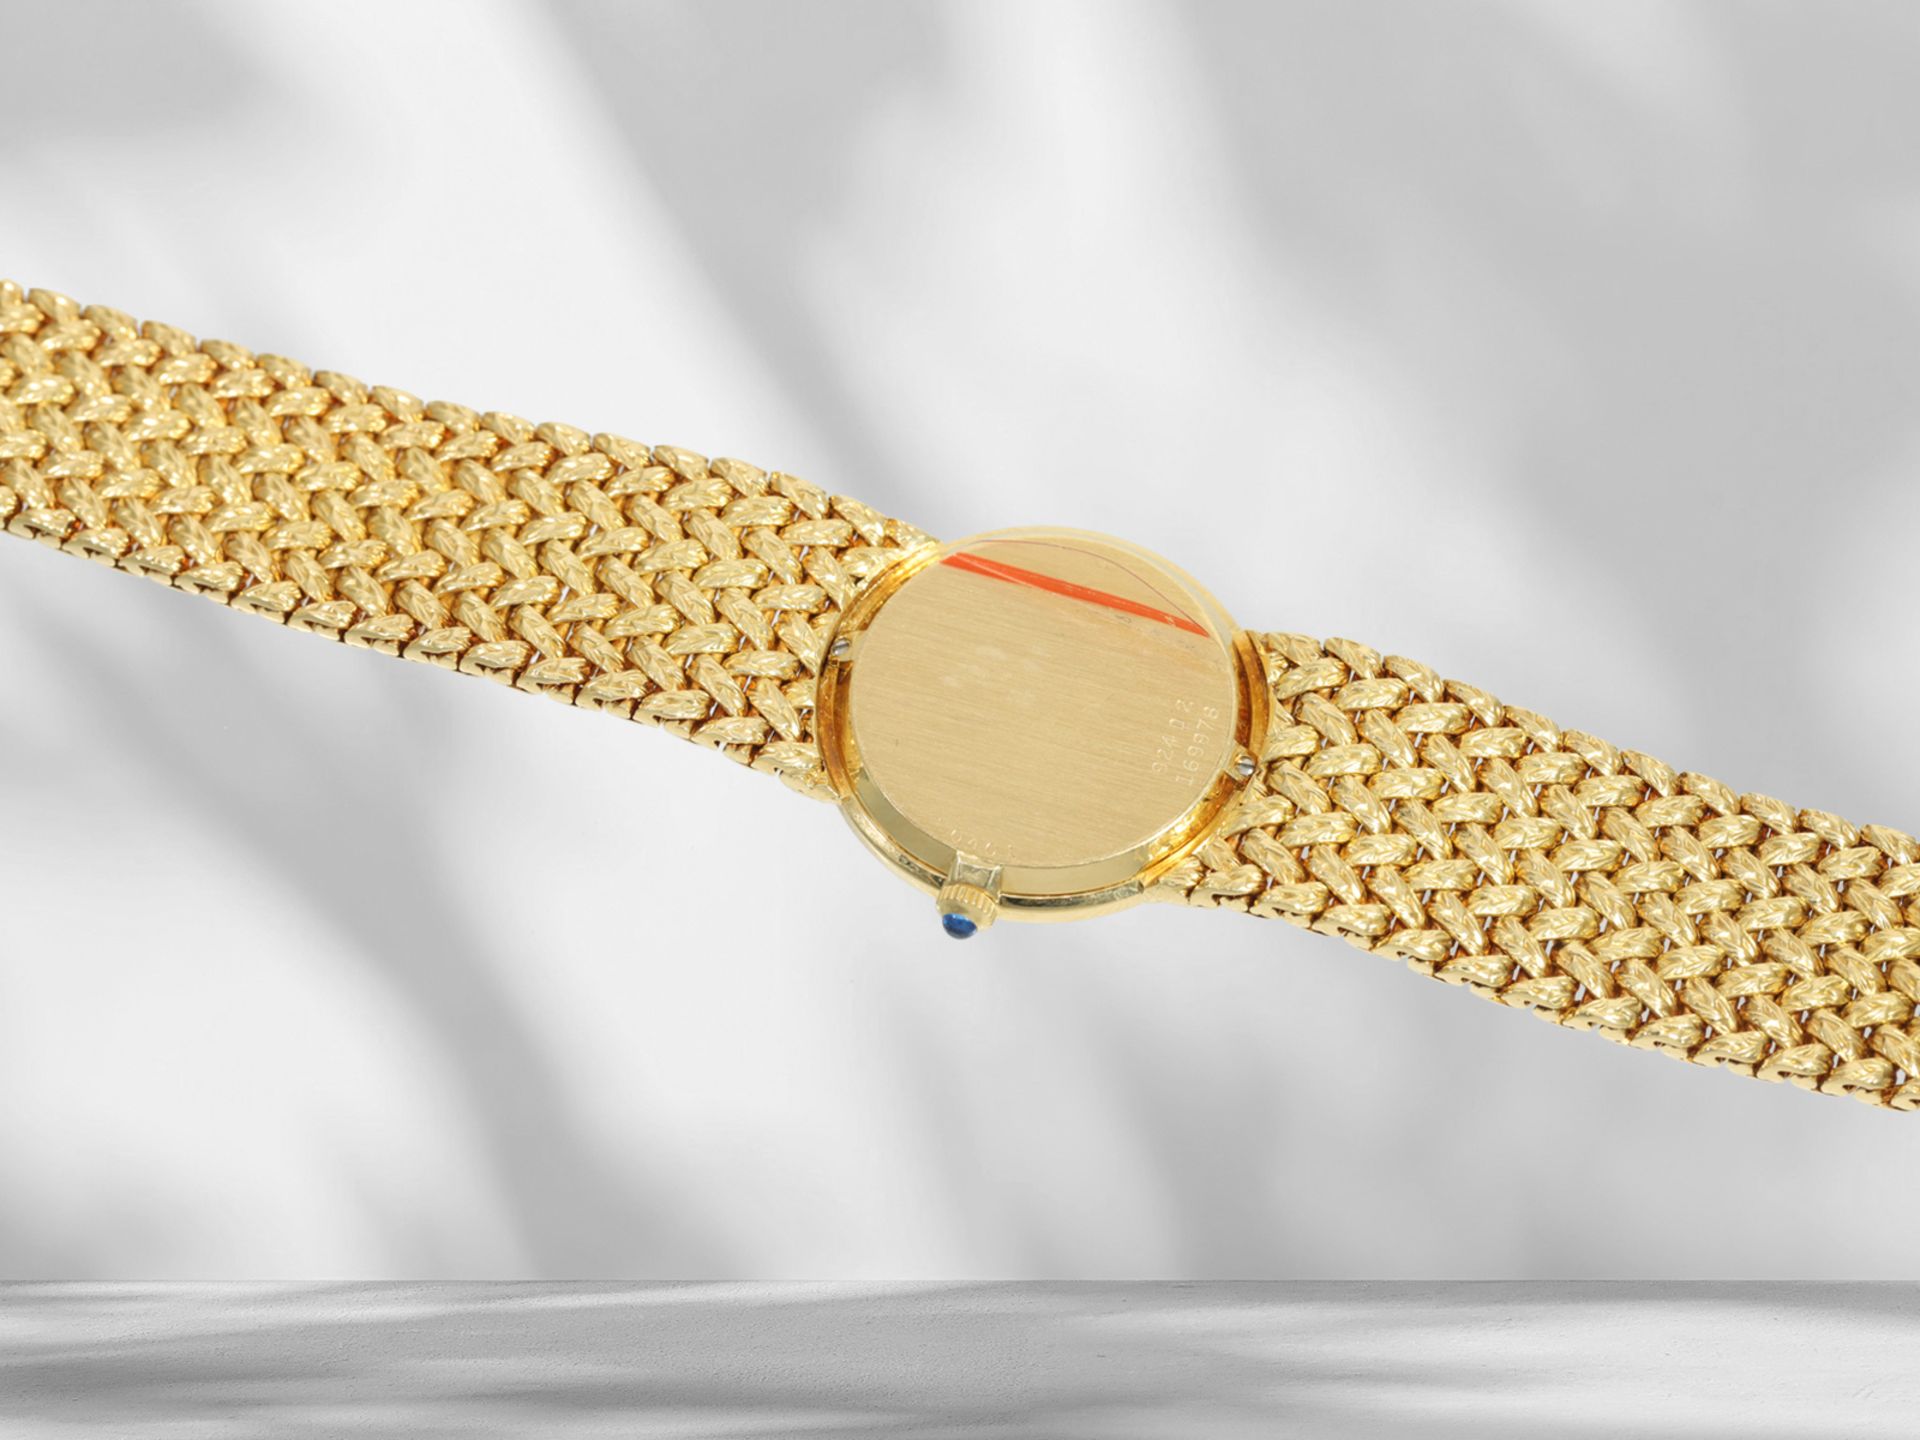 Wristwatch: like new, luxurious and very thin ladies' watch by Piaget/Cartier, Ref: 924 D 2, 18K gol - Image 4 of 4